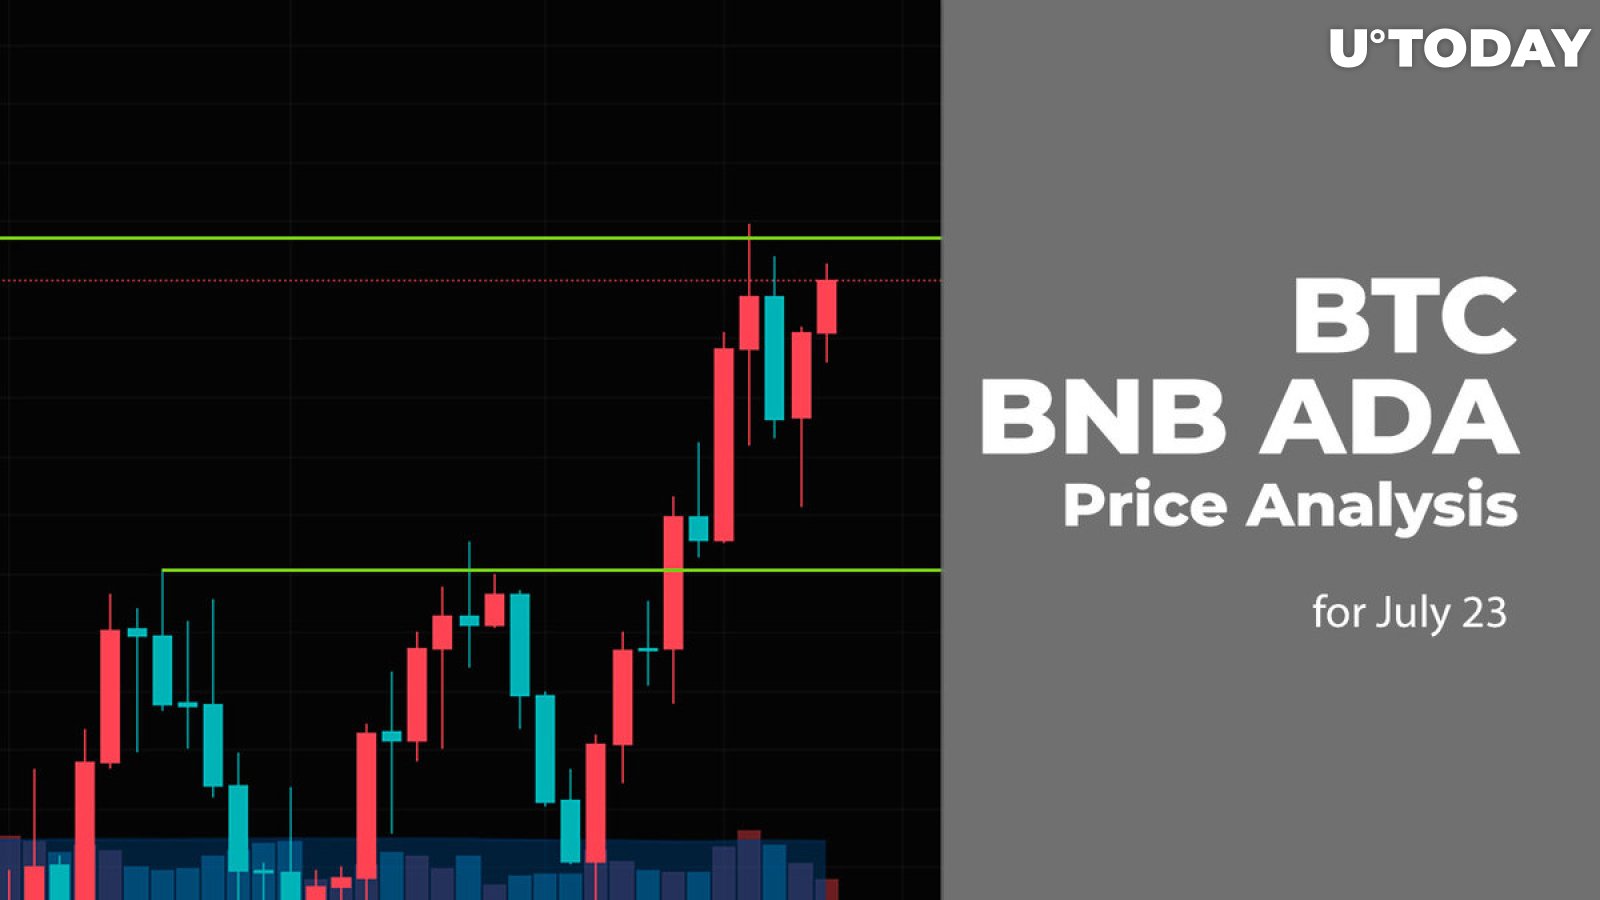 BTC, BNB and ADA Price Analysis for July 23